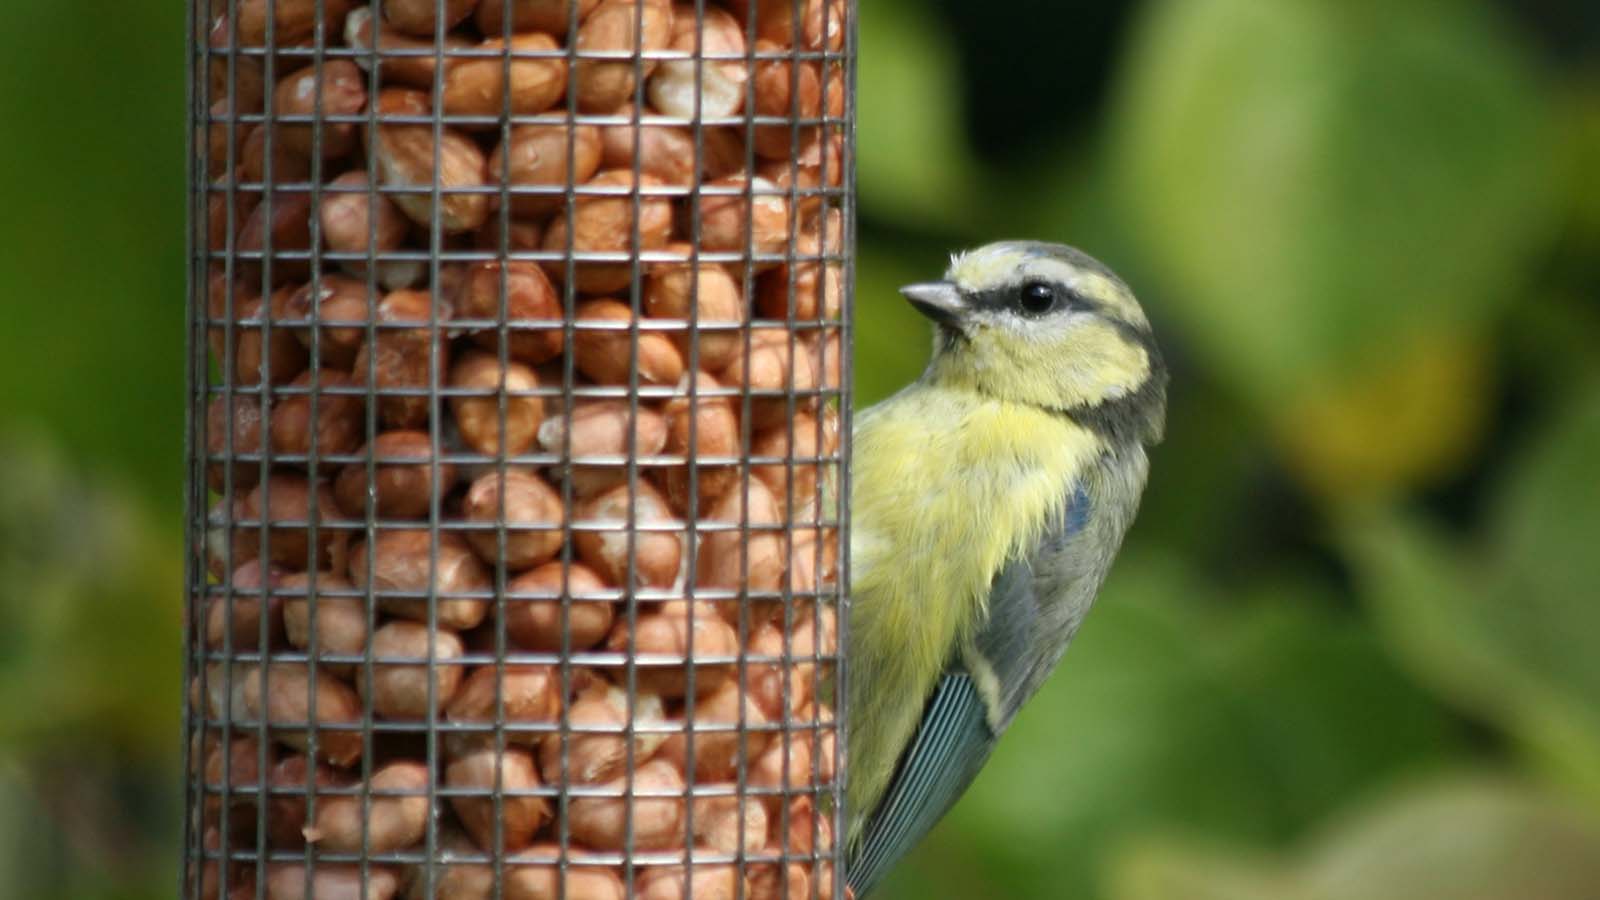 Garden birds: What to feed them